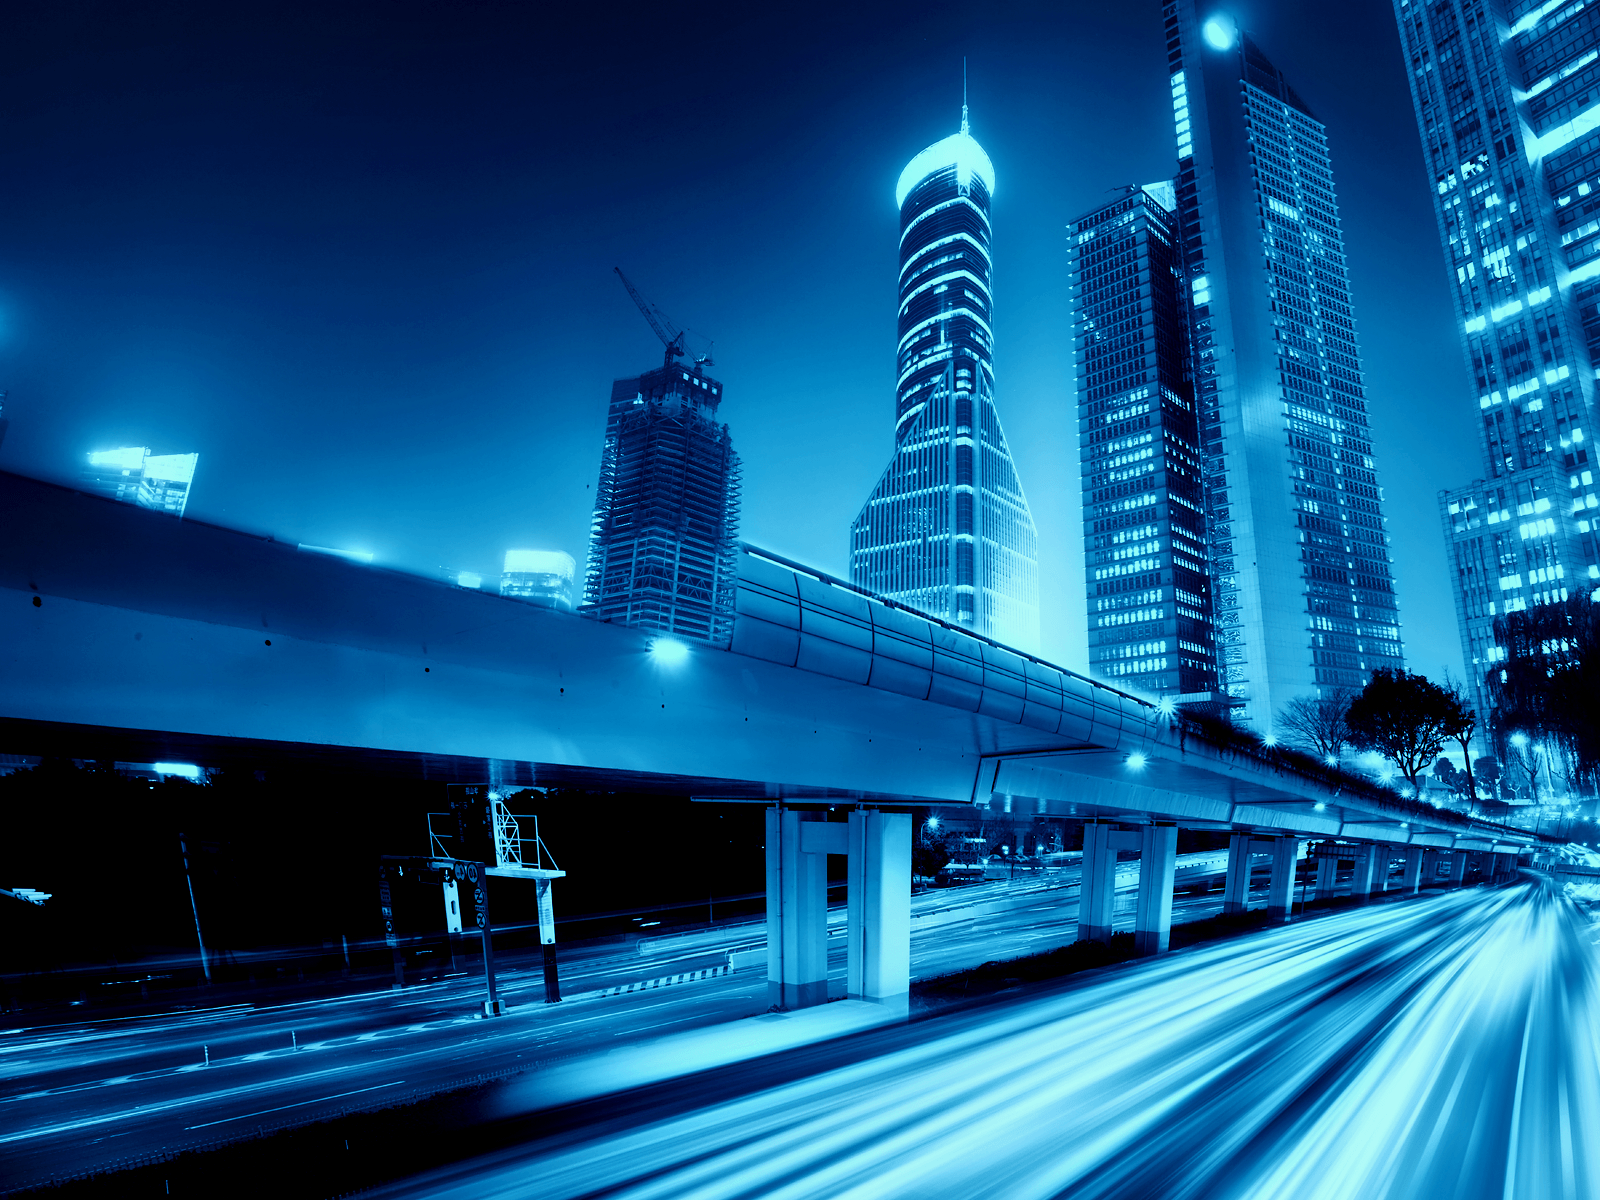 Aesthetic Blue City Wallpapers